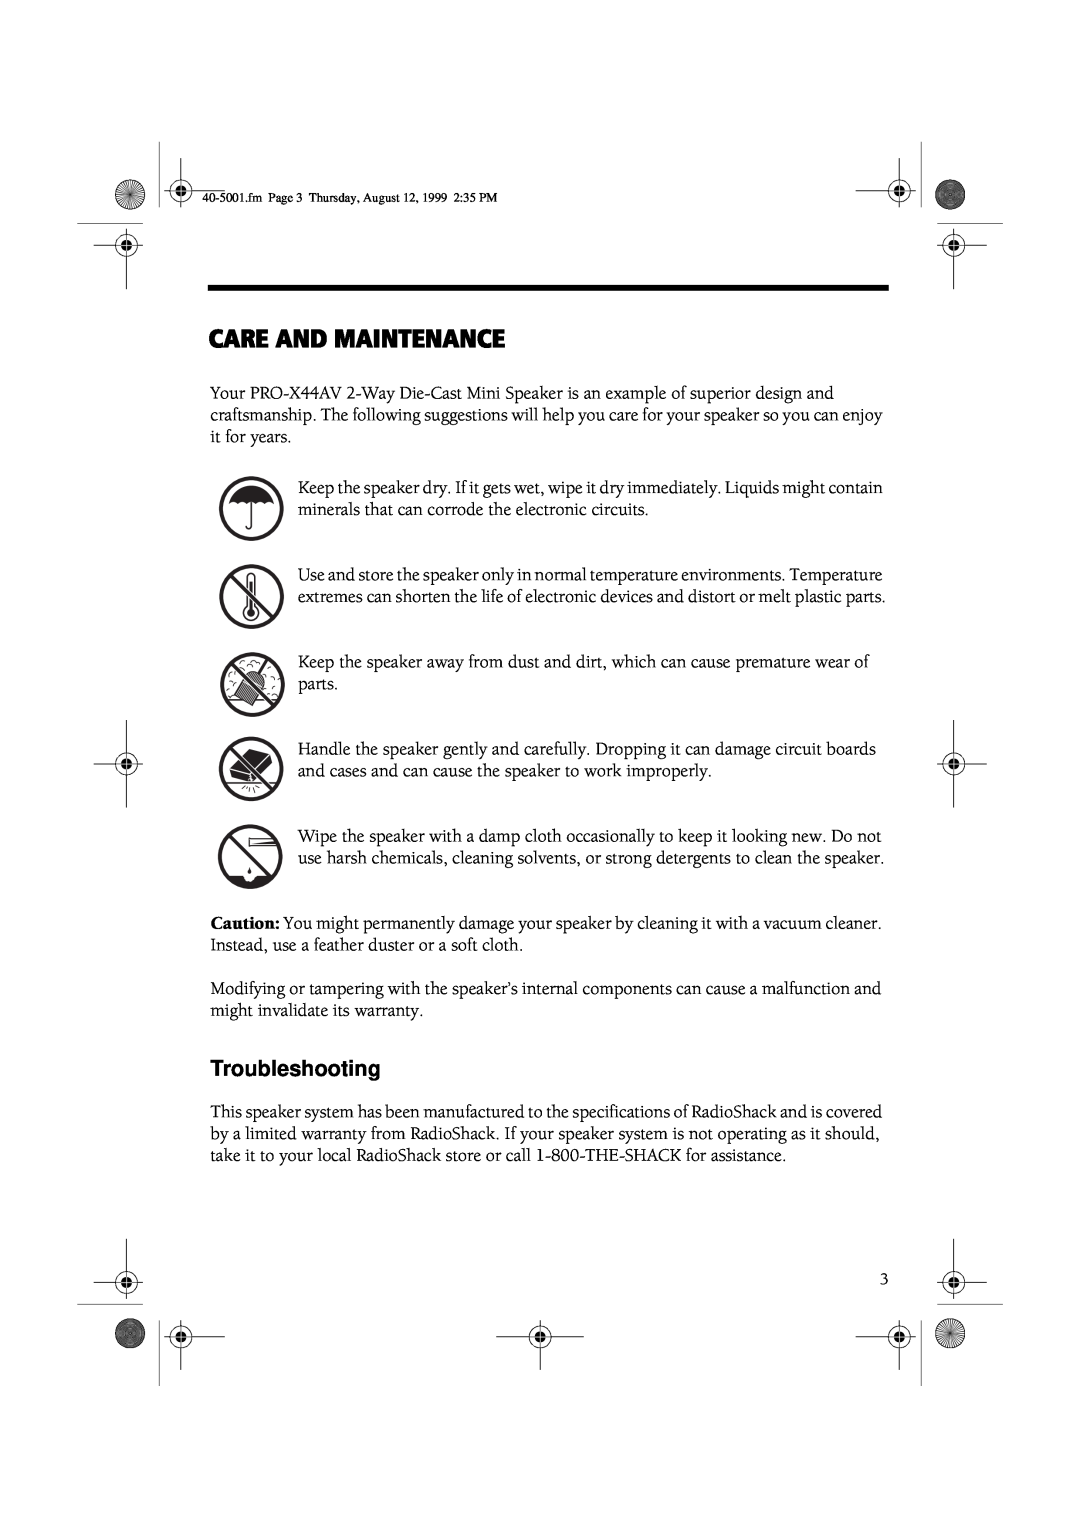 Tandy PRO-X44AV manual Care And Maintenance, Troubleshooting 